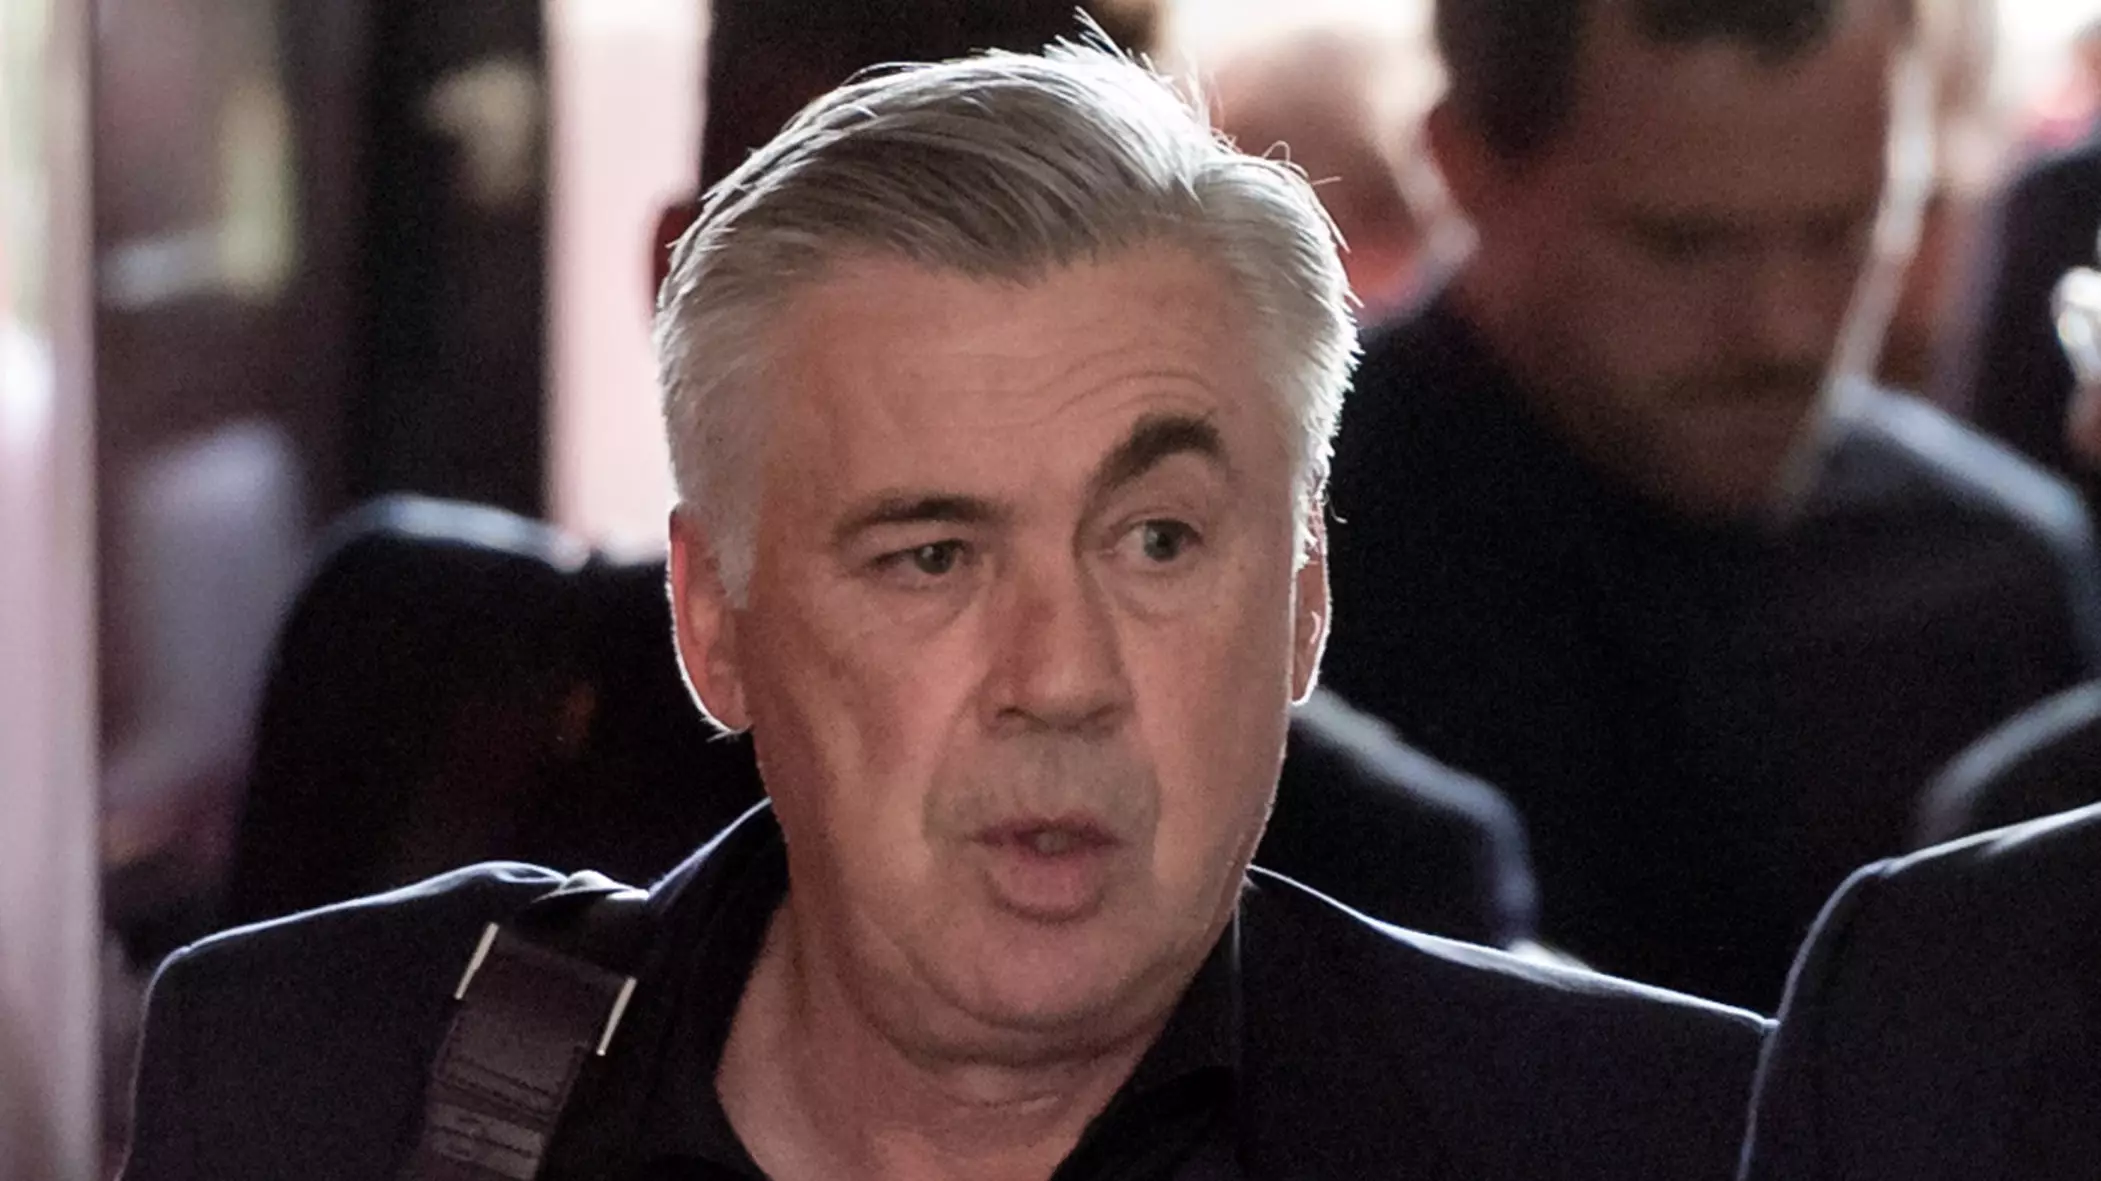 Carlo Ancelotti Only Has His Eyes On One Job